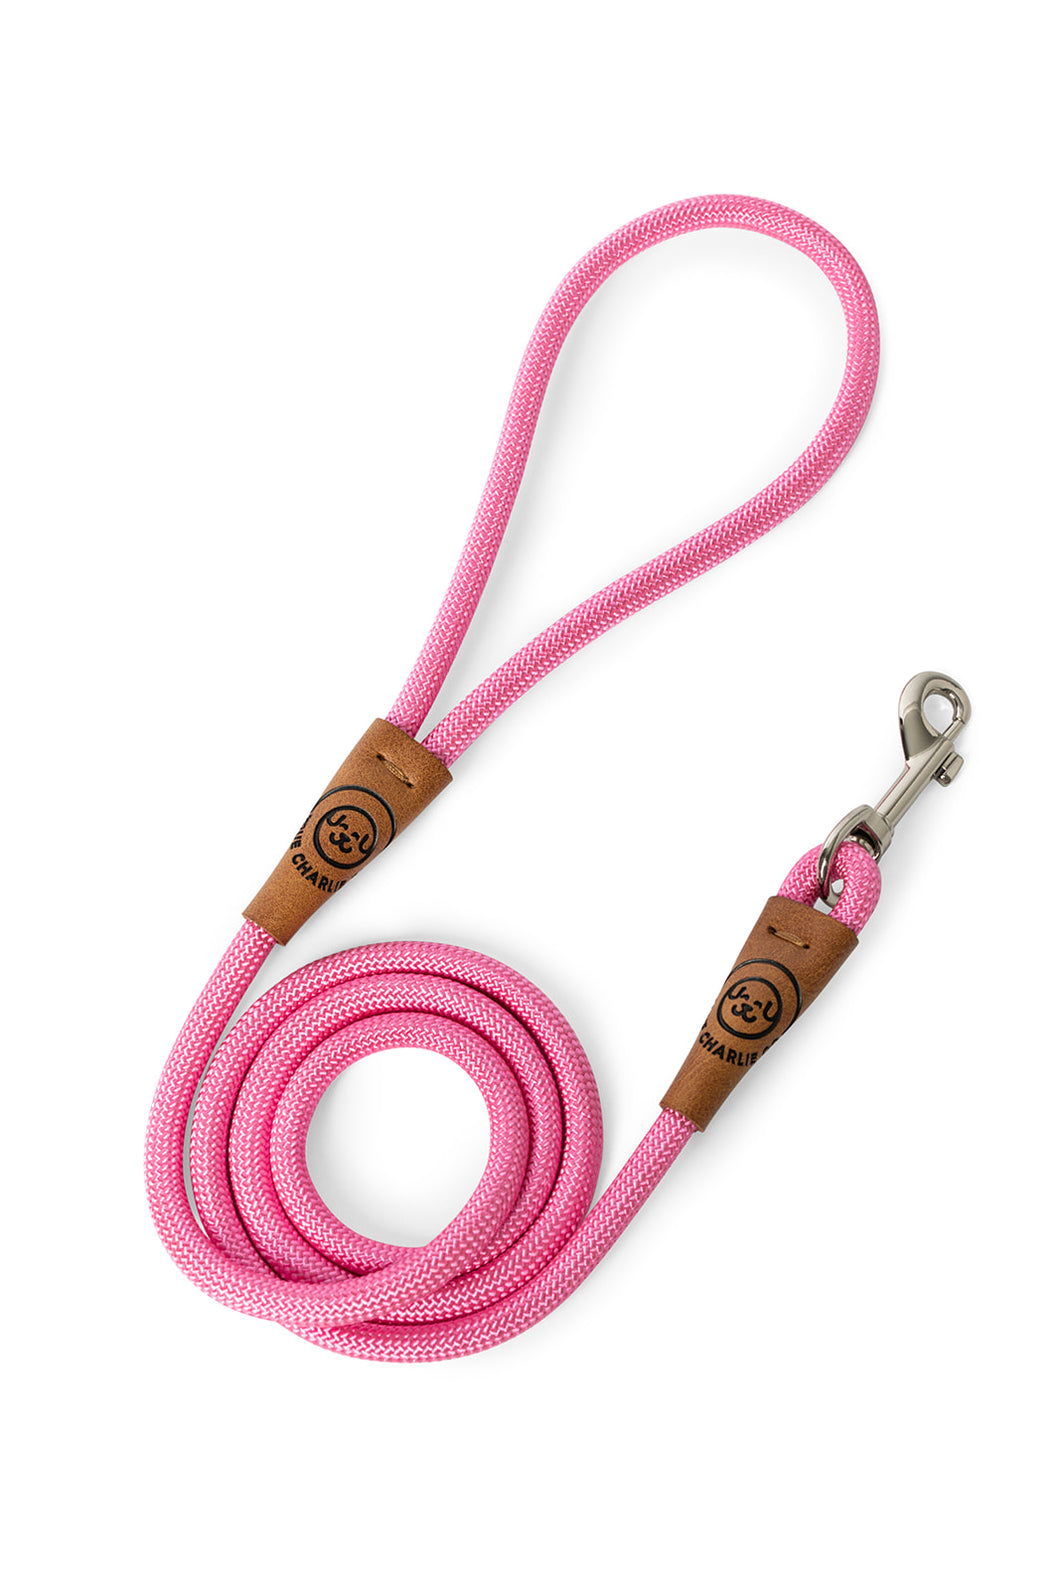 Dog leash in 8mm pink rope with metal clip and leather features